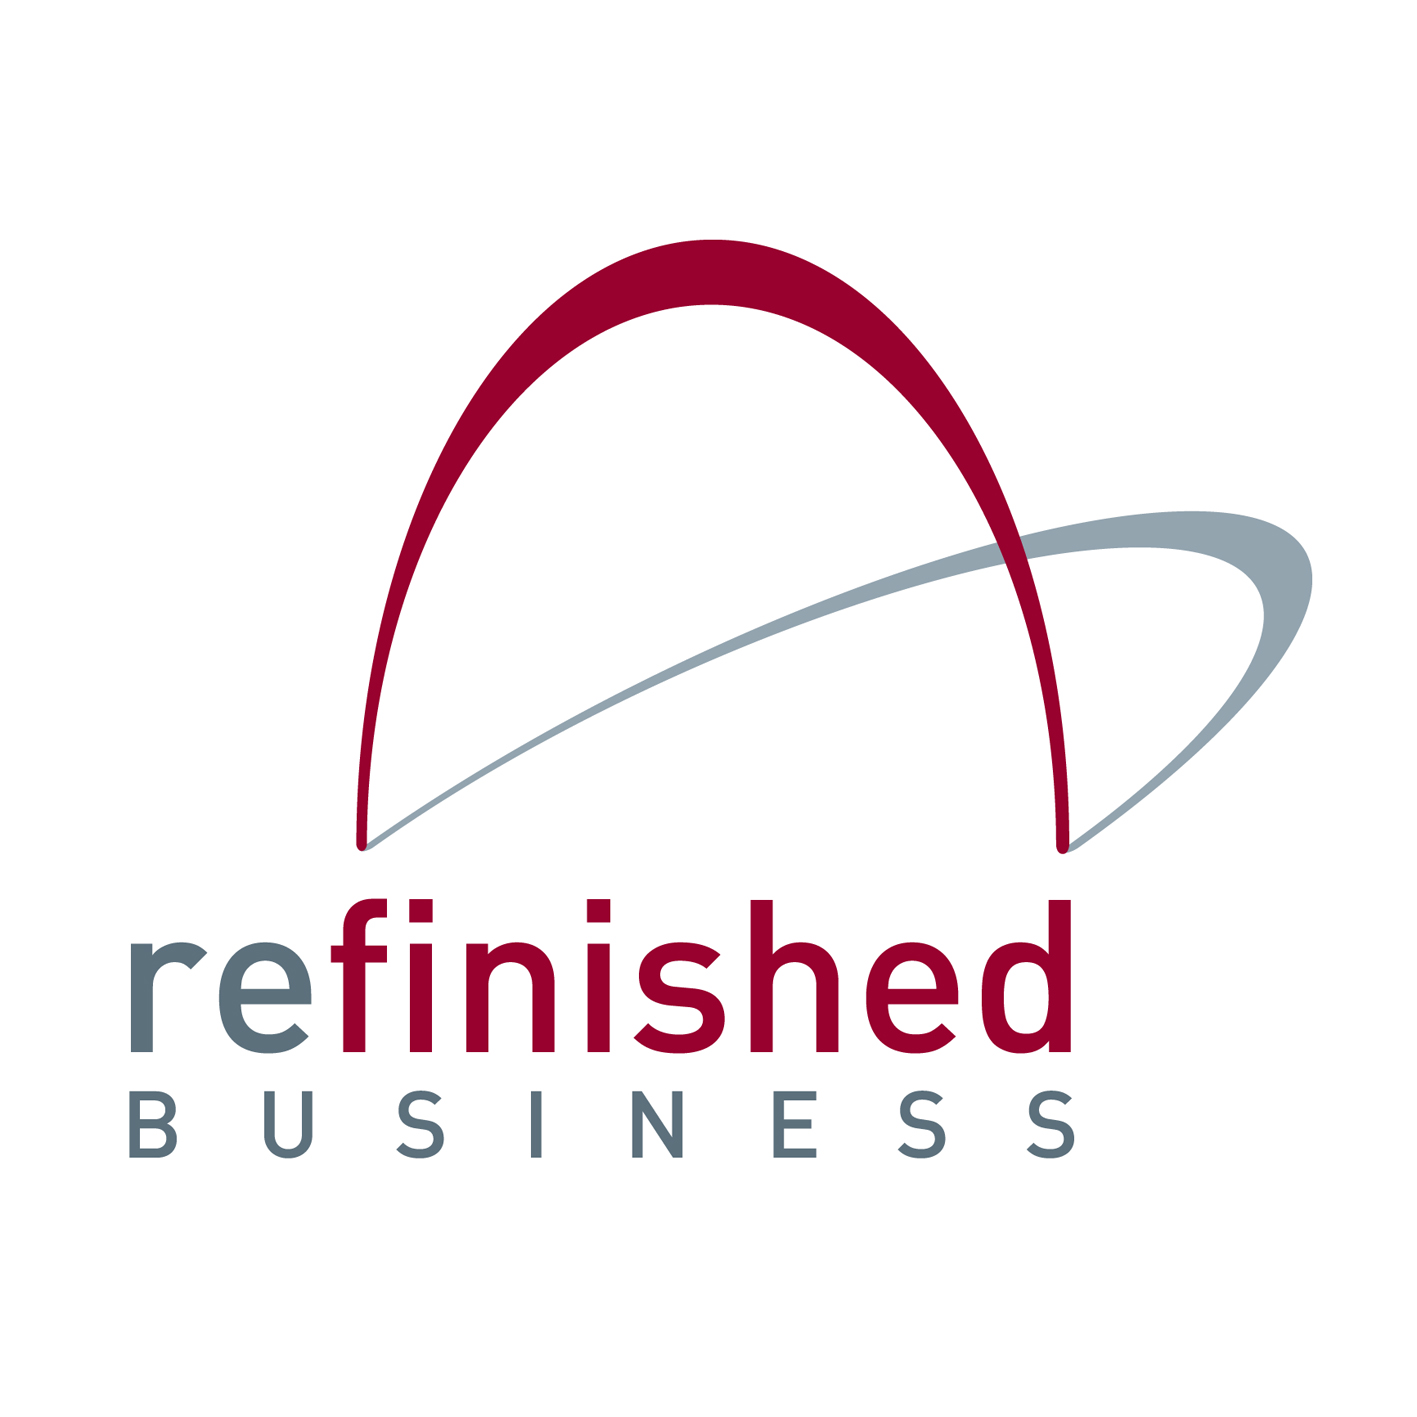 Refinished Business